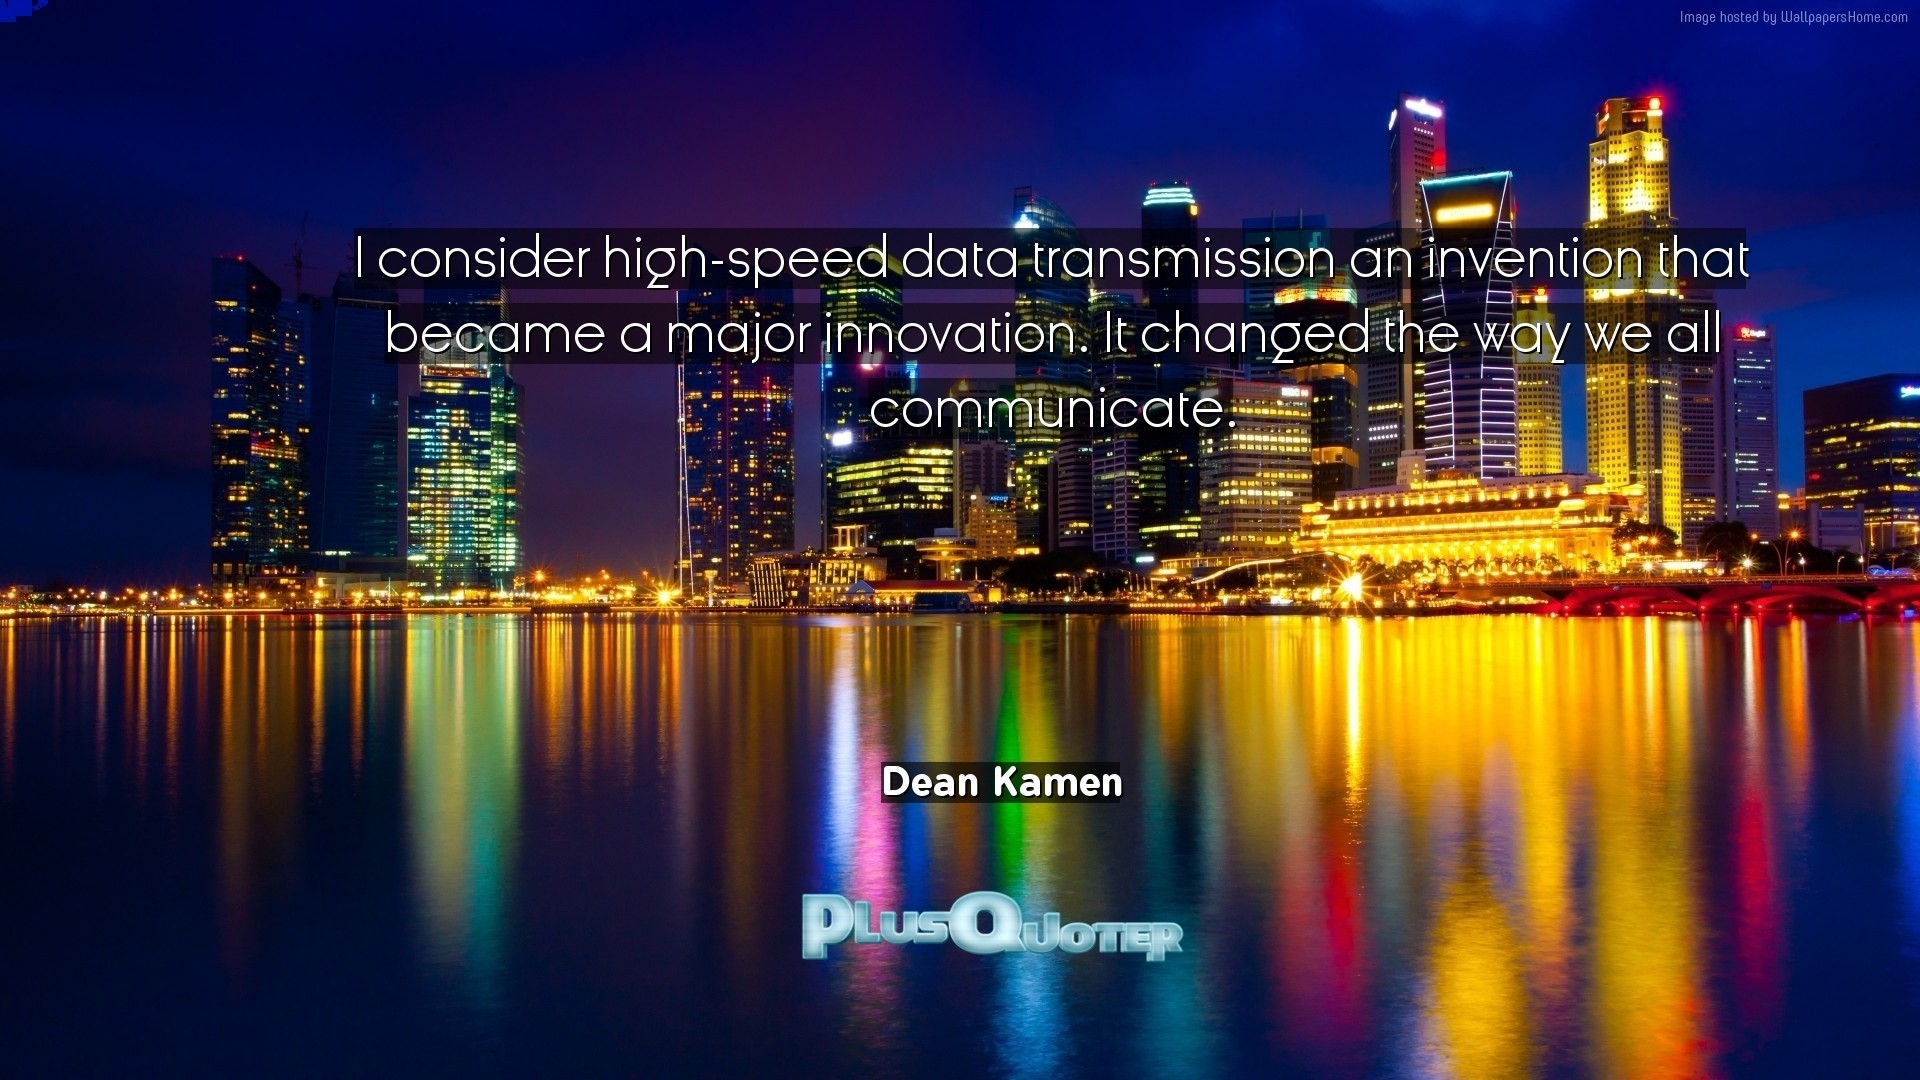 1920x1080 Download Wallpaper with inspirational Quotes- "I consider high-speed data  transmission an invention